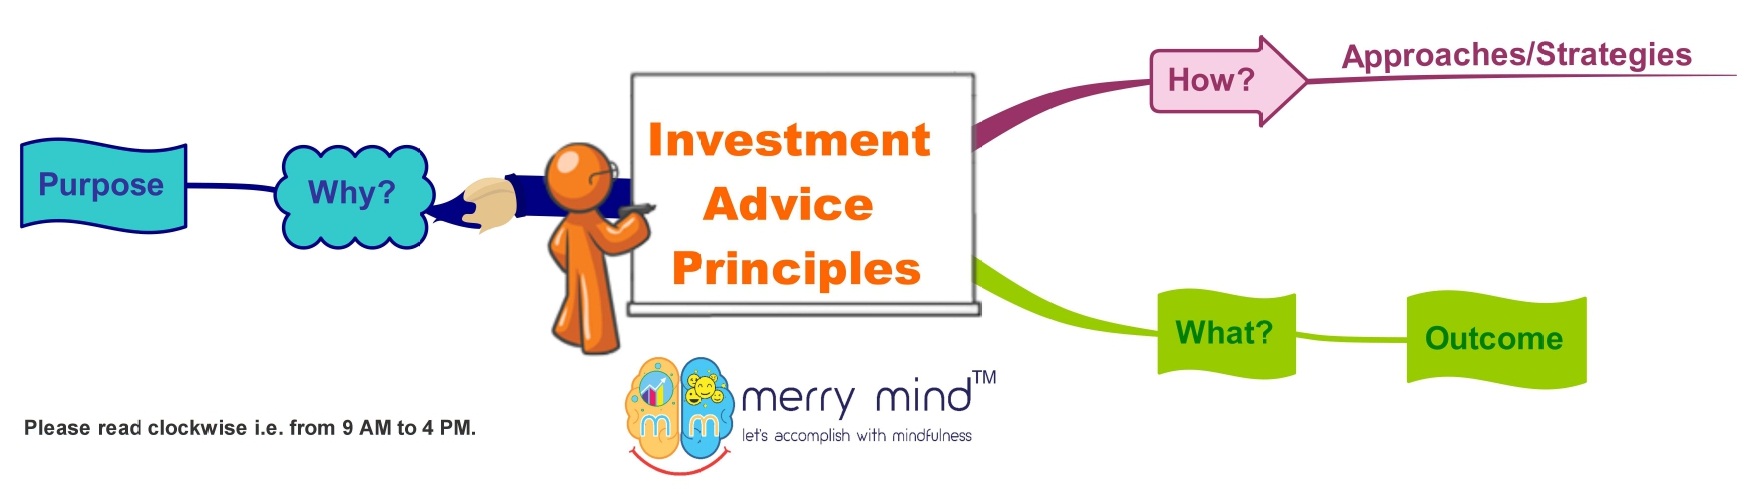 Investment Advice Principles